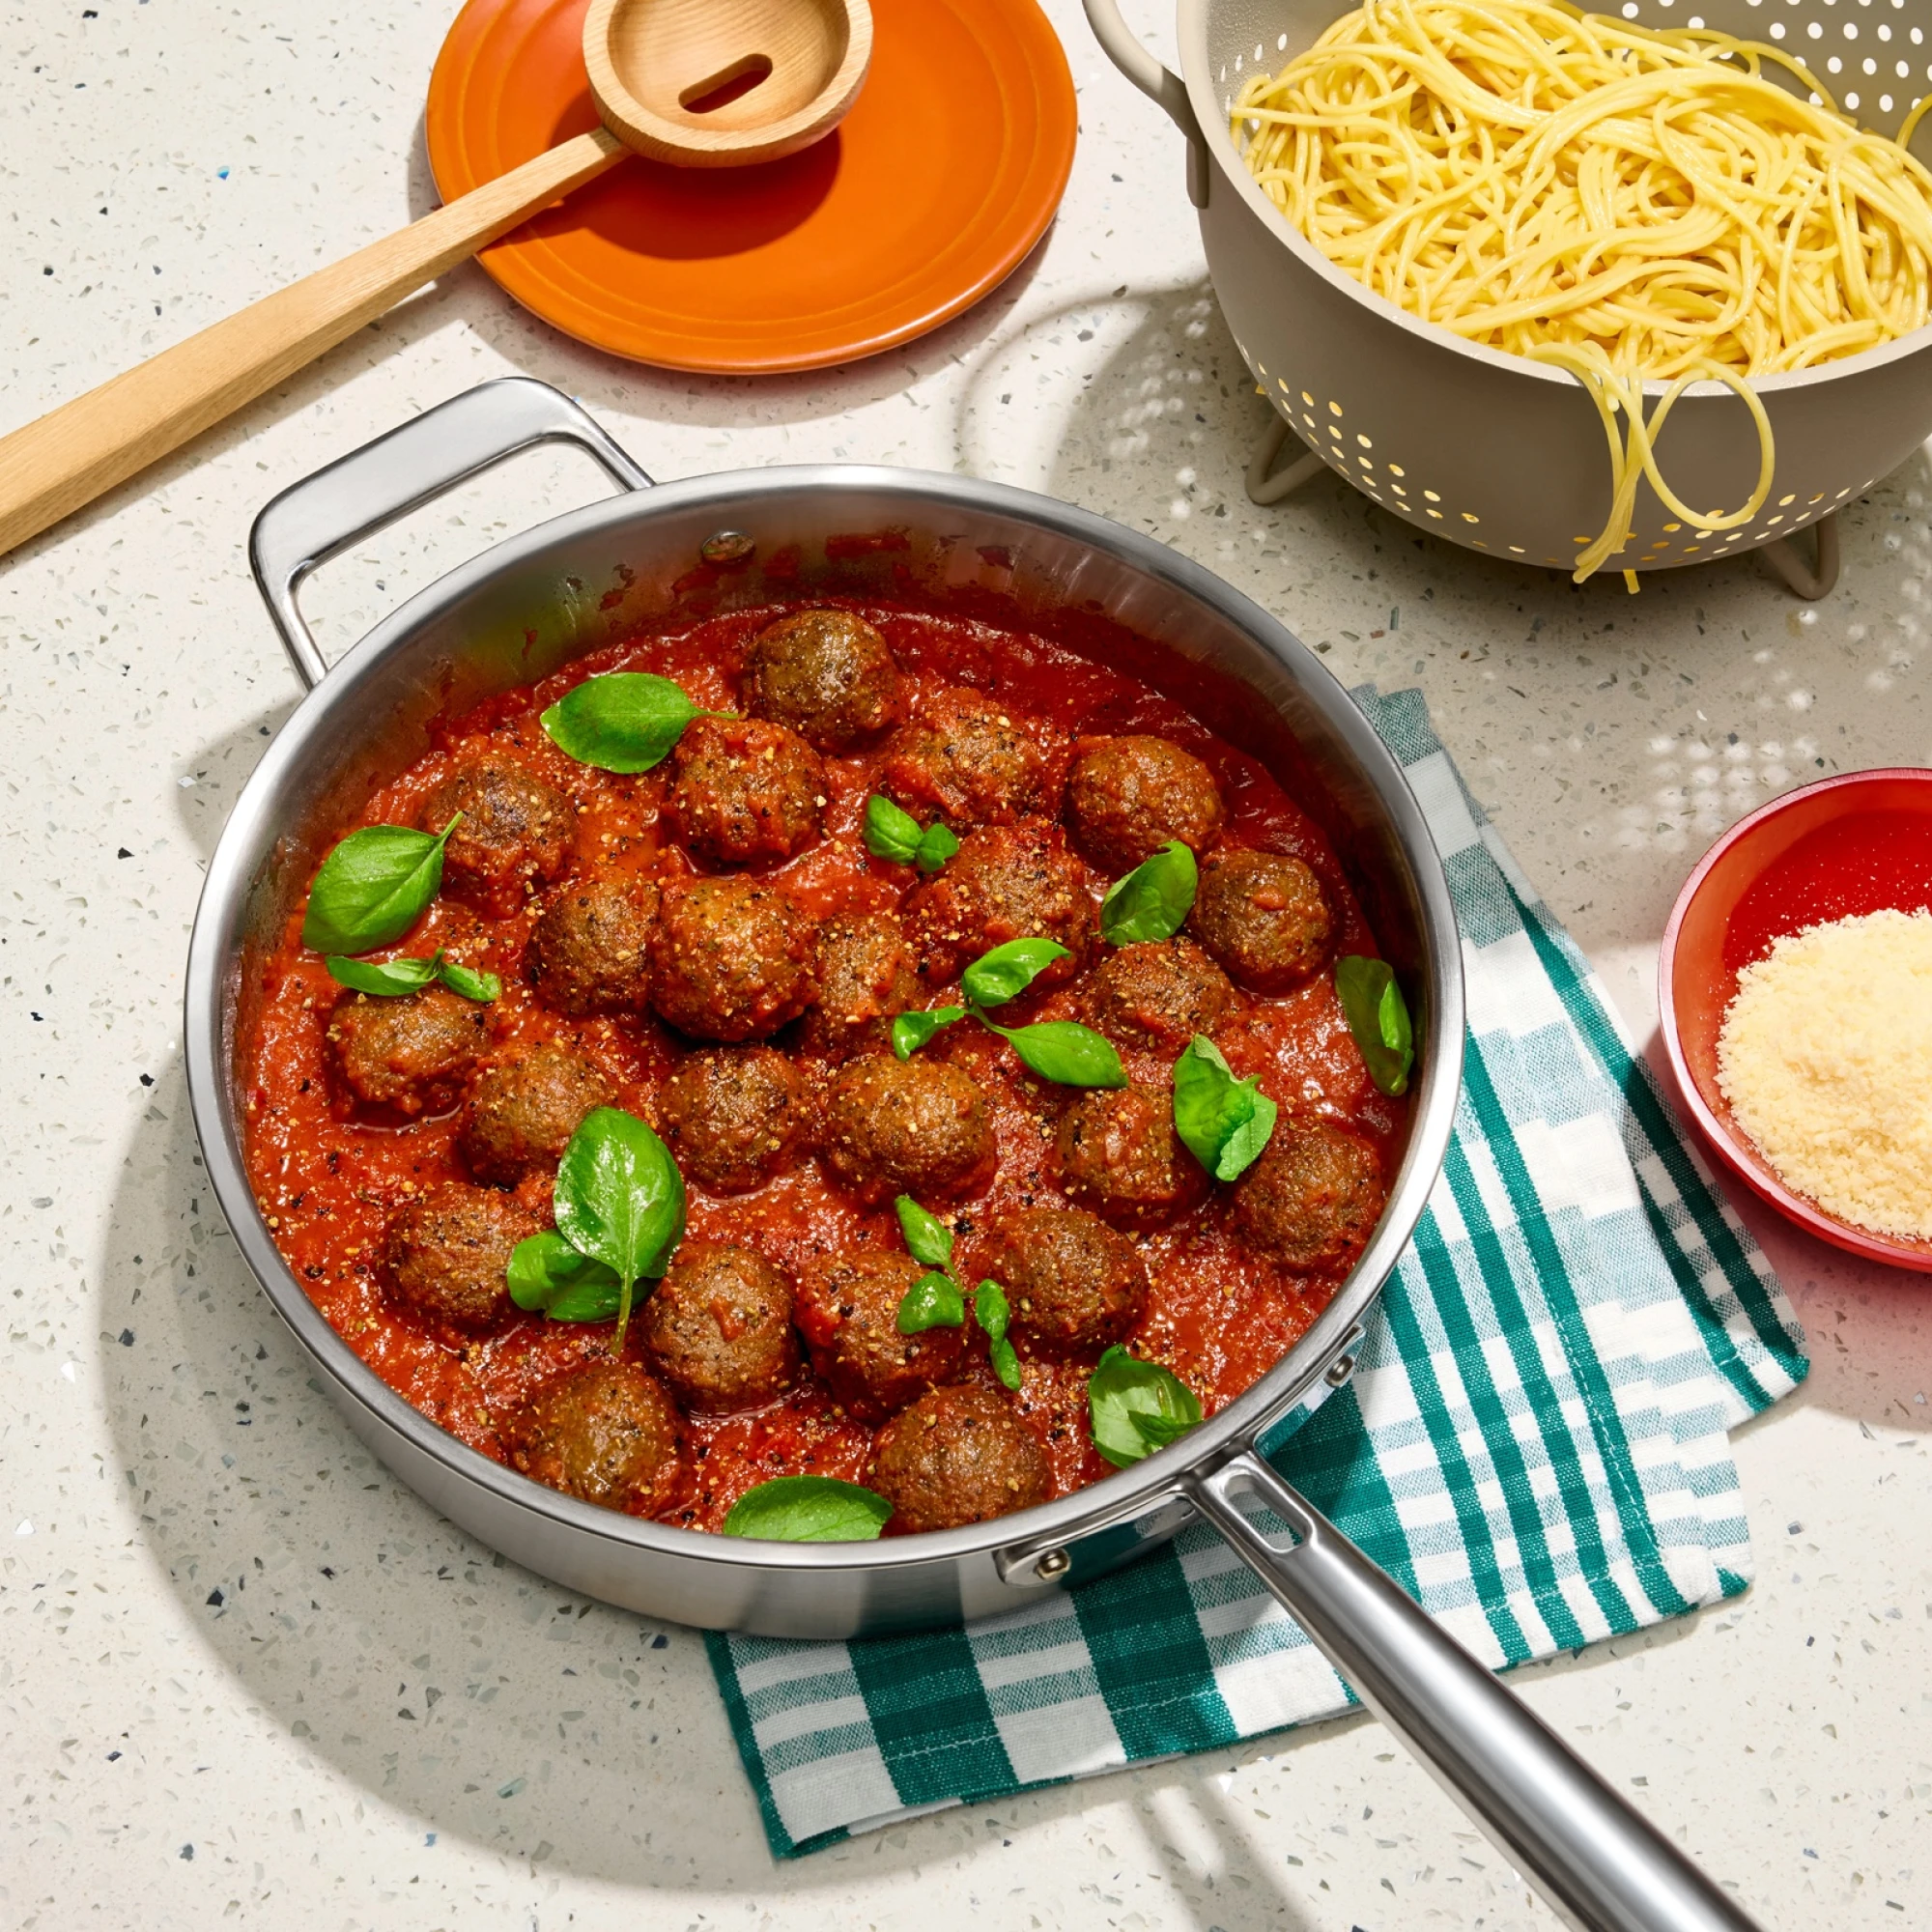 Impossible Meatballs presented in a pan